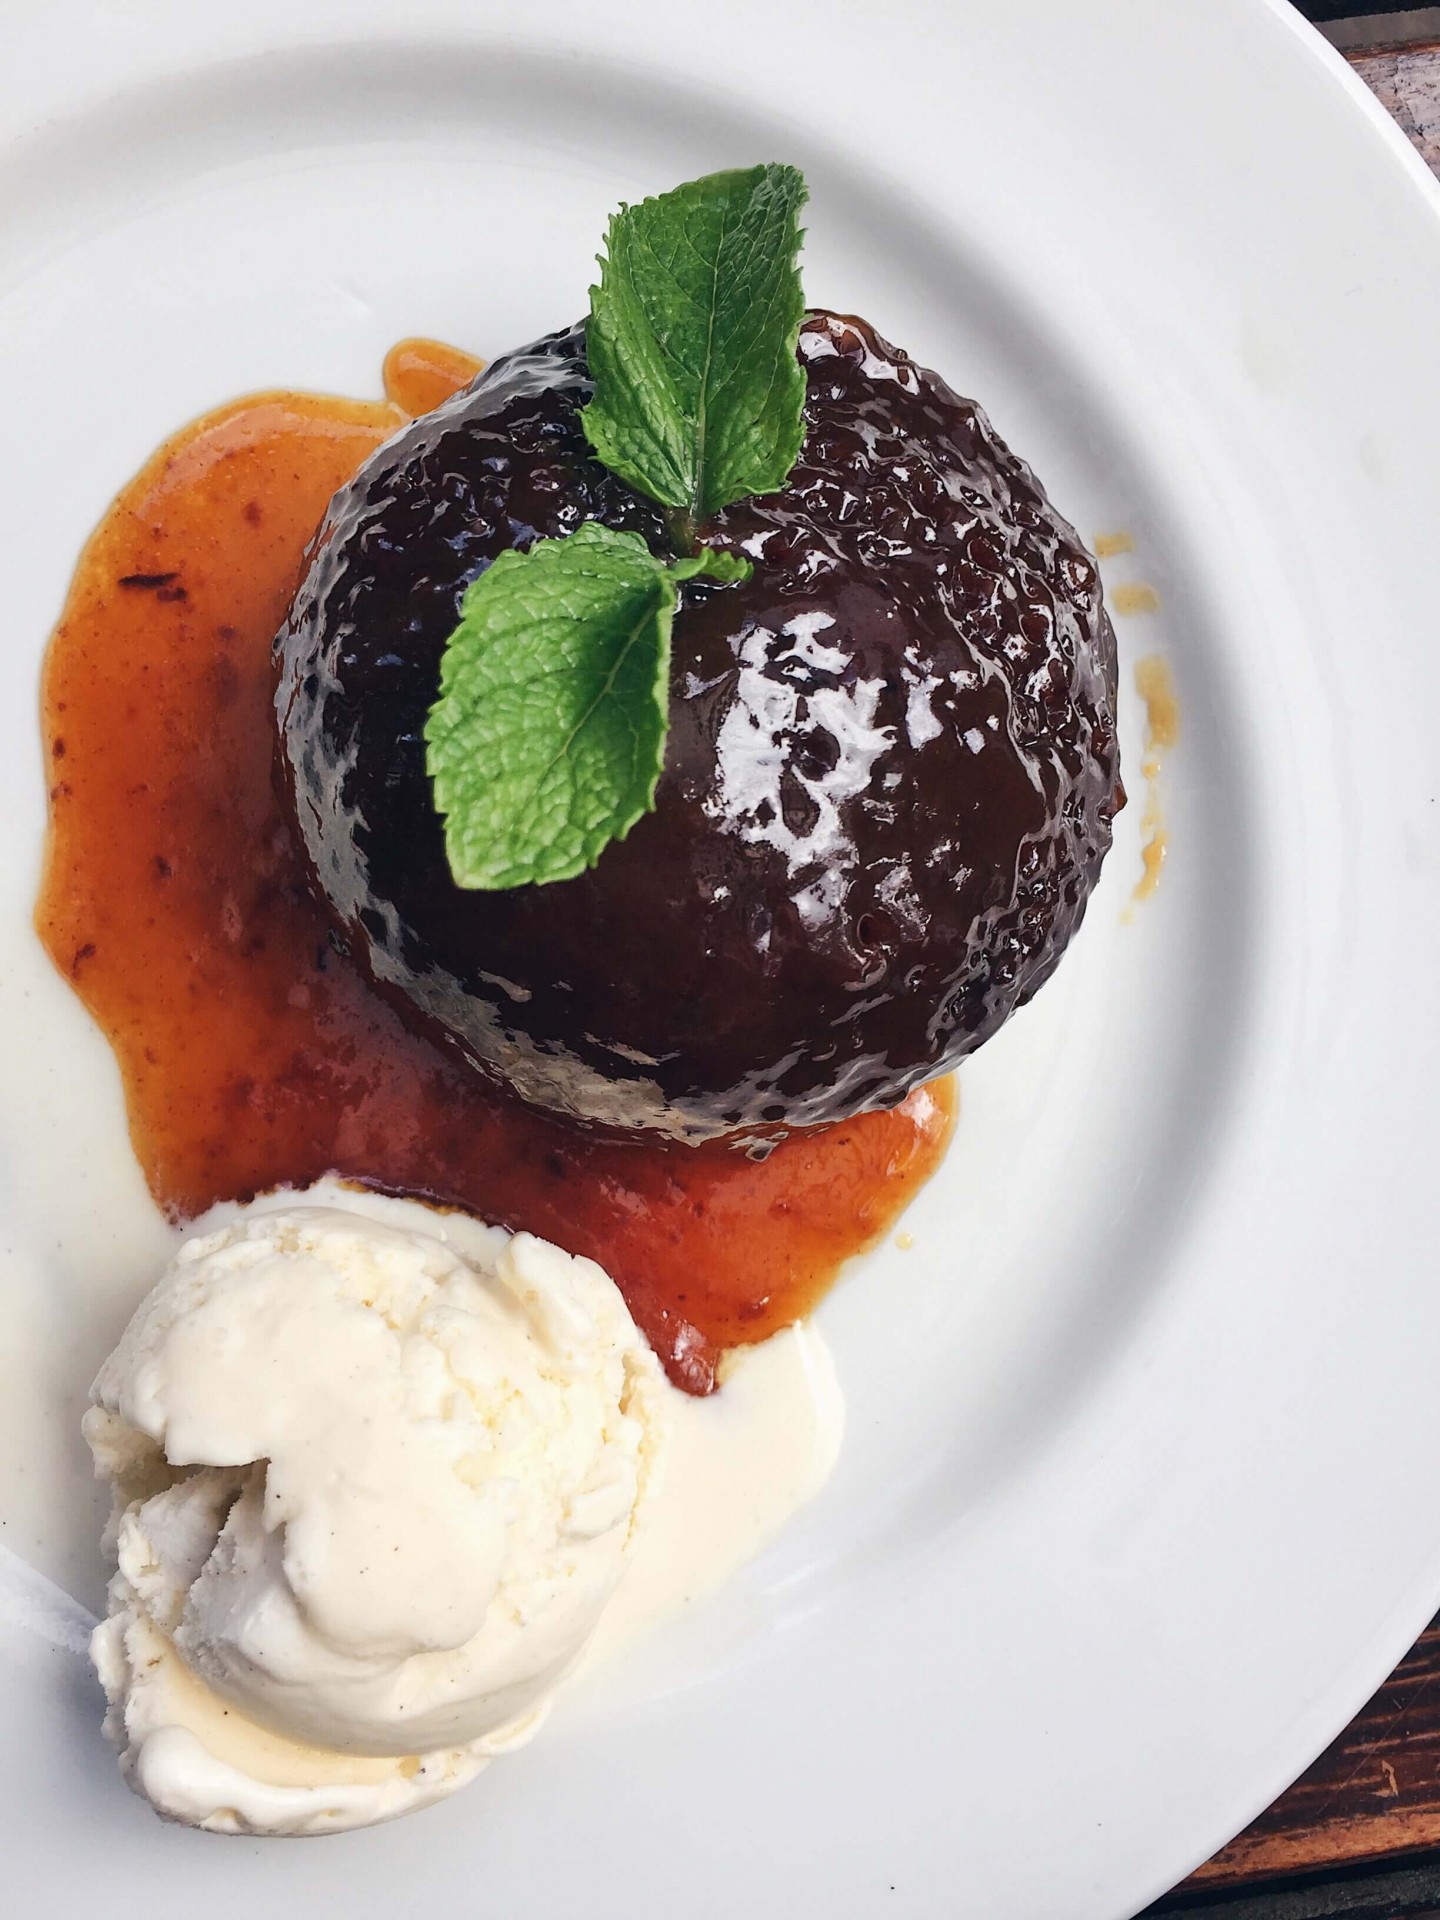 The sticky toffee and medjool date pudding from the Spaniards Inn pub on Hampstead Heath.